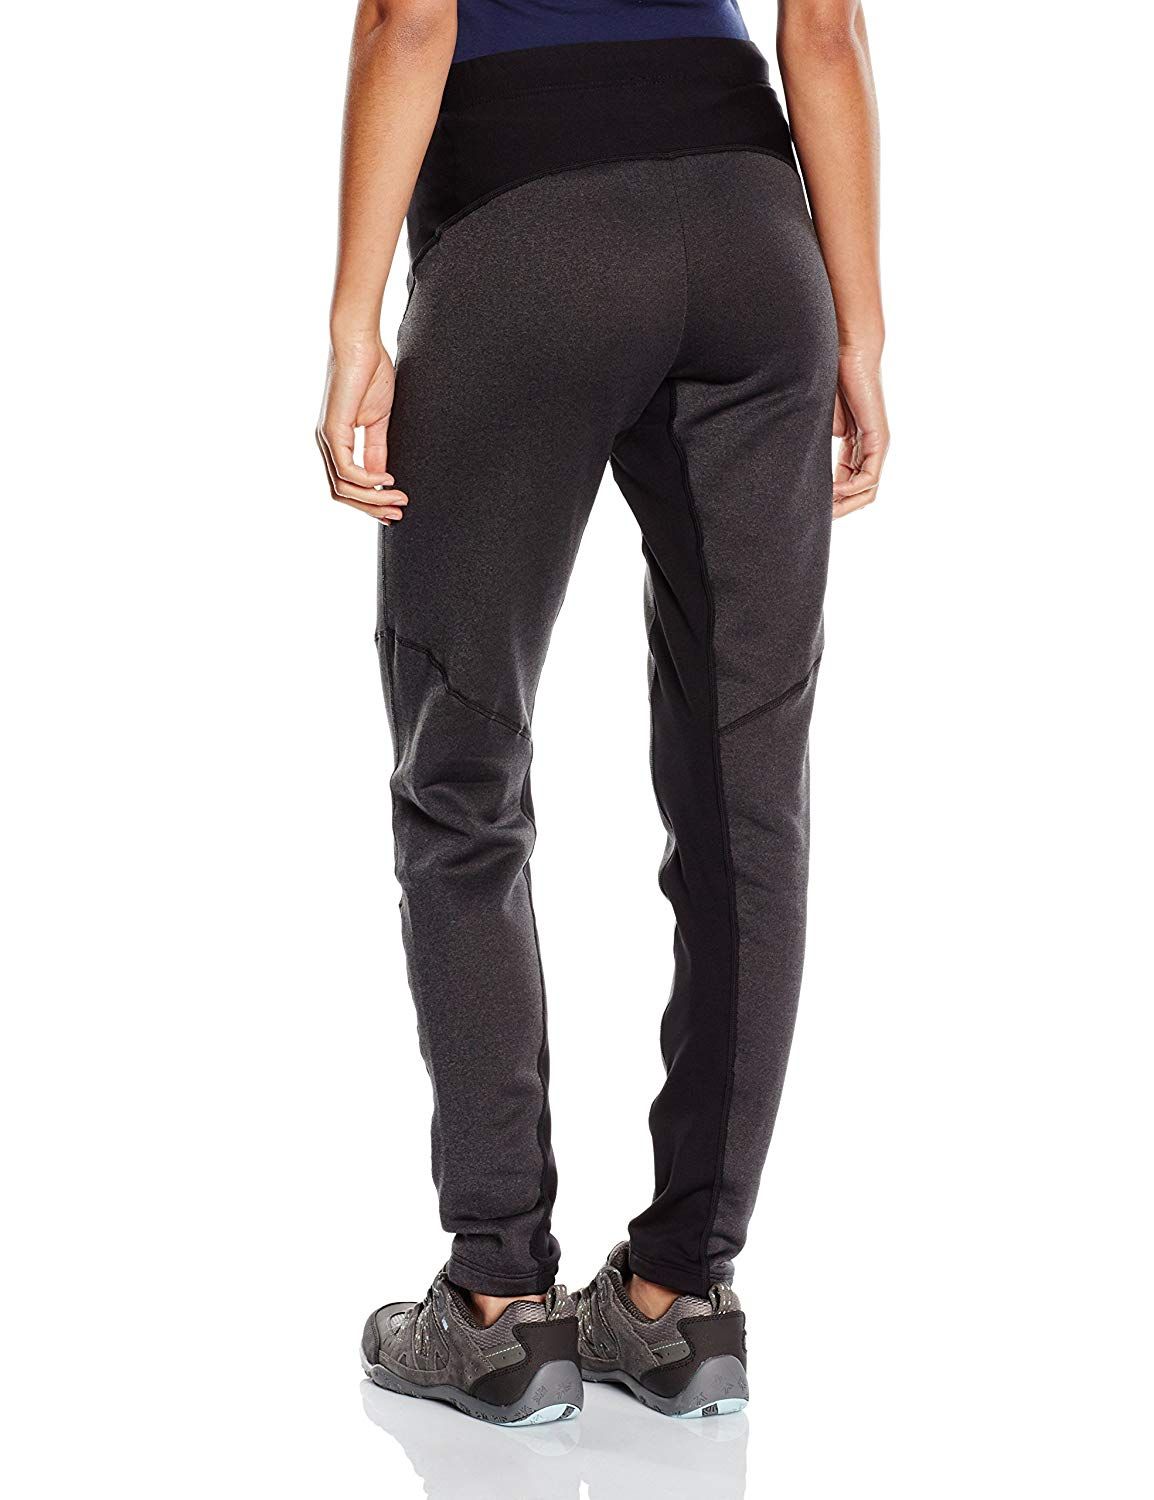 Beat Pant W 38 BLACK - taille S